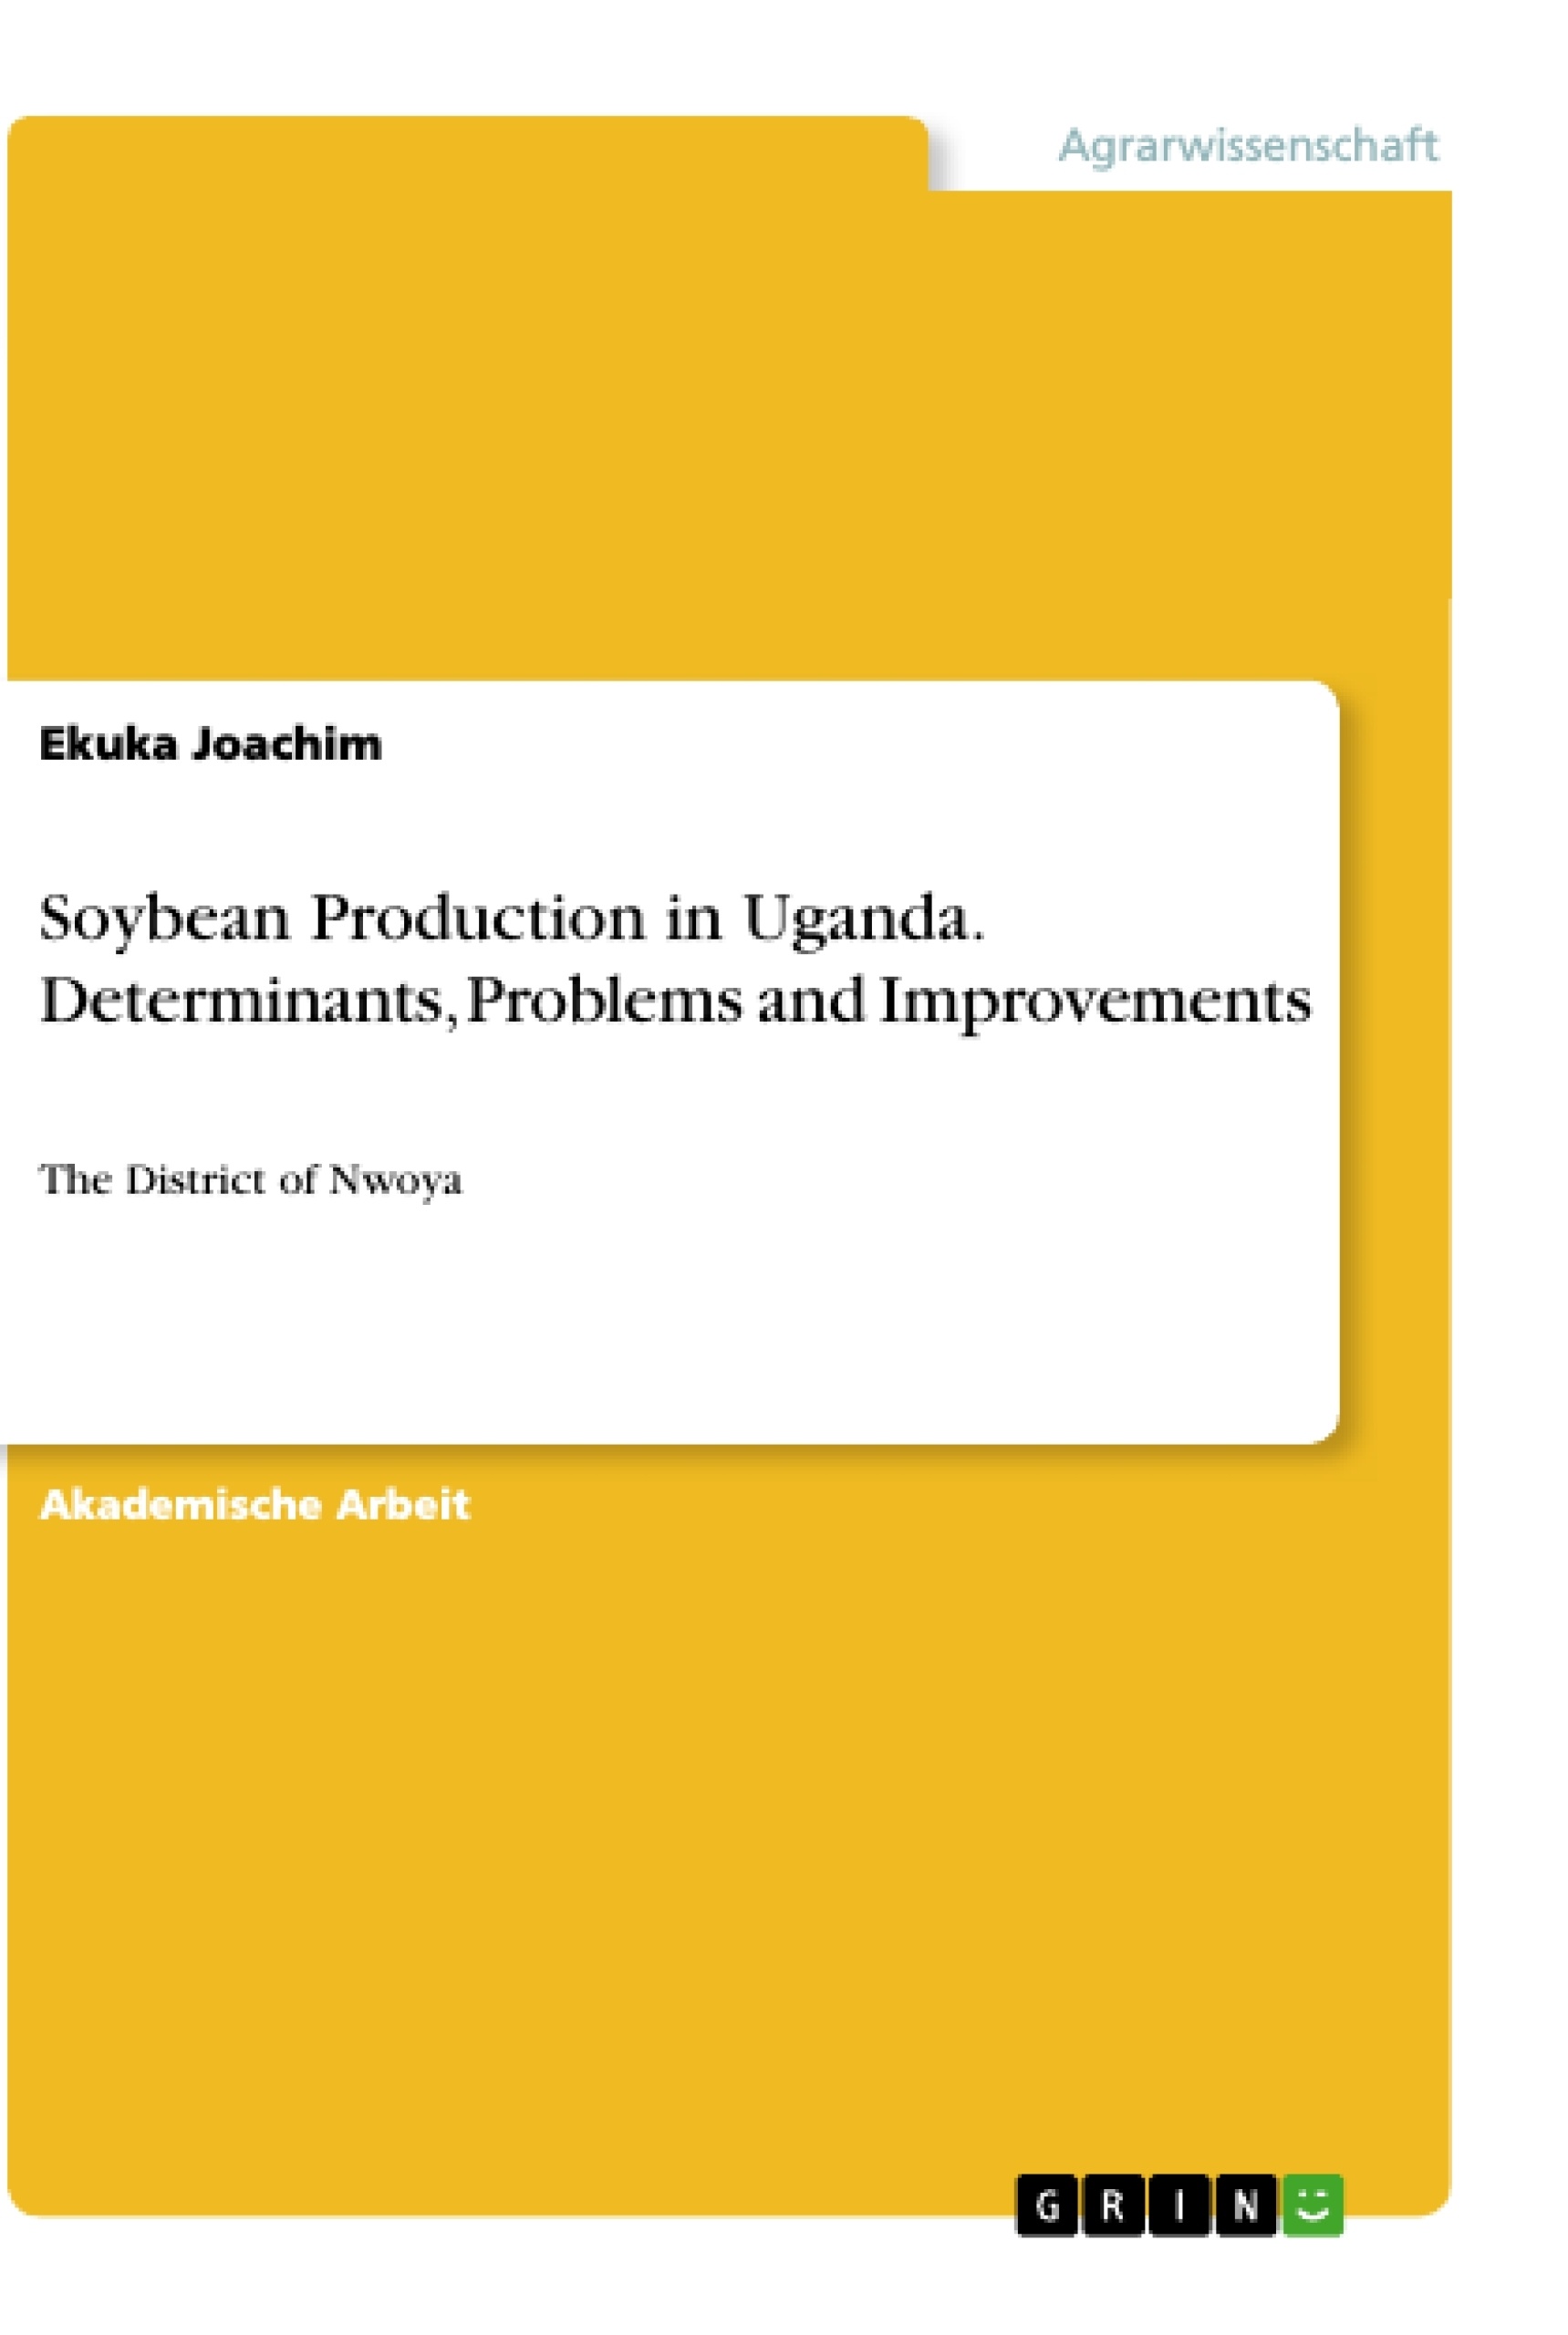 Title: Soybean Production in Uganda. Determinants, Problems and Improvements